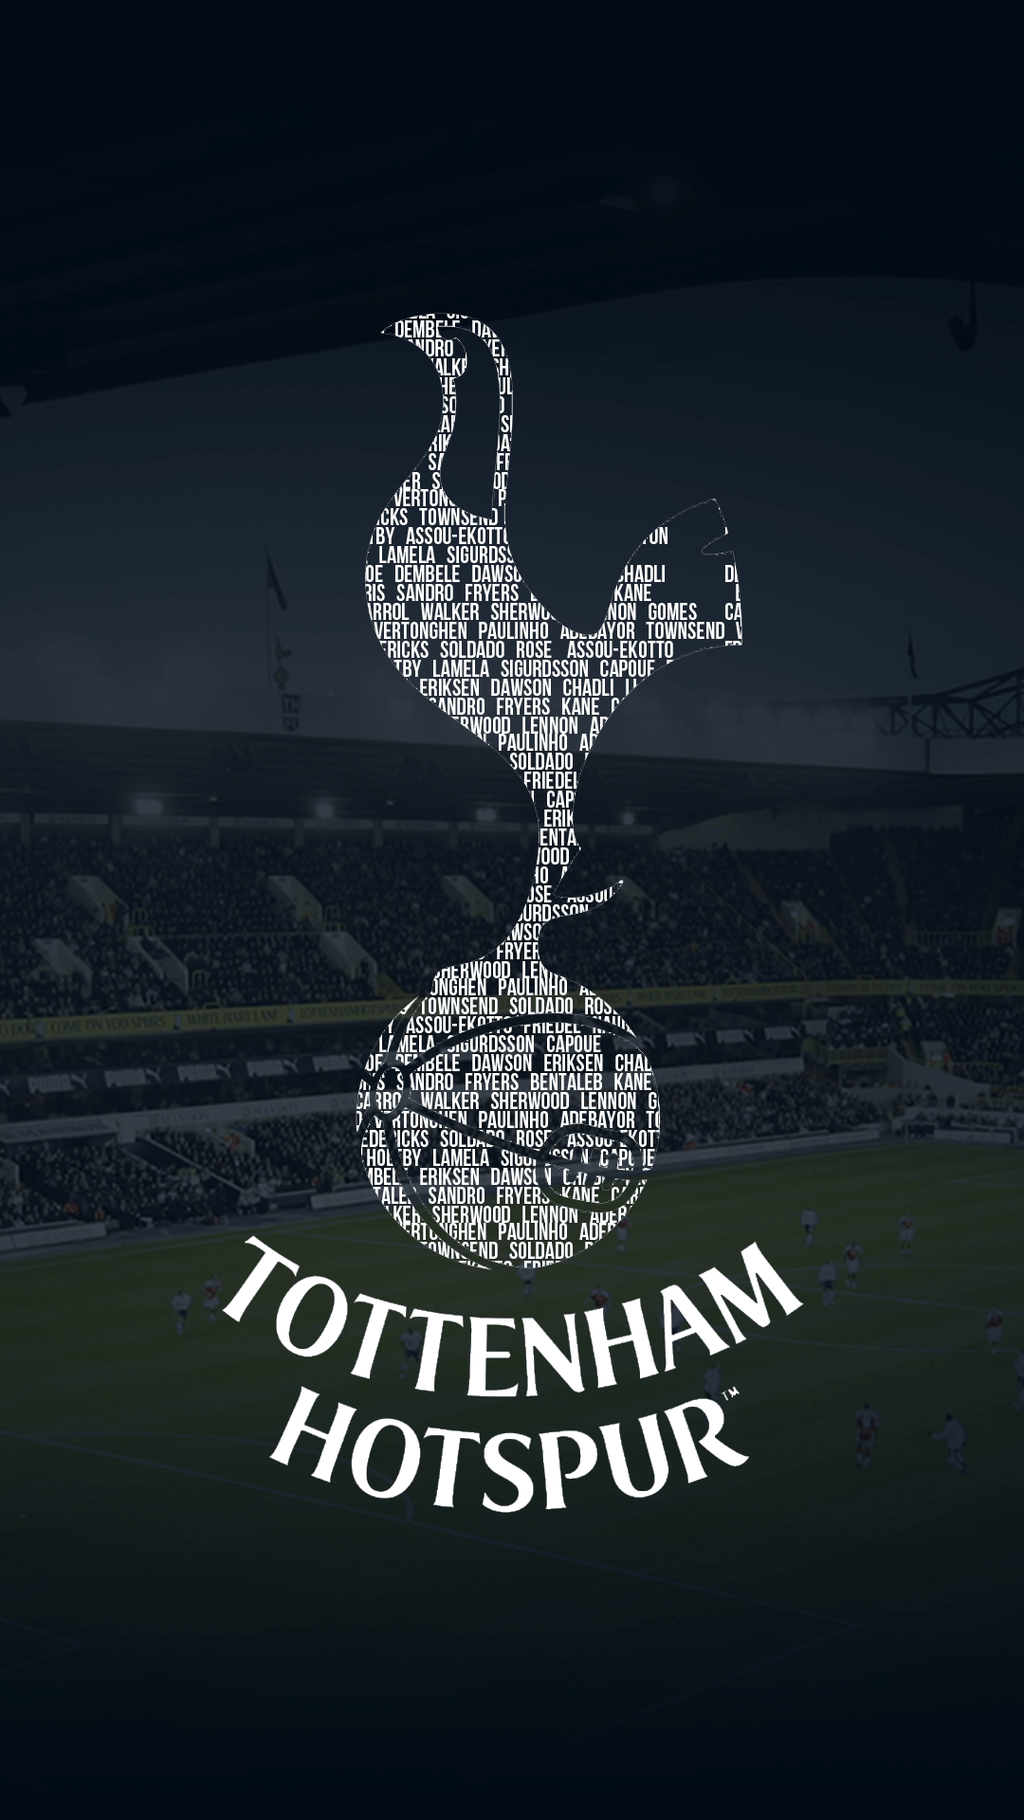 Free download Spurs Wallpaper The Fighting Cock